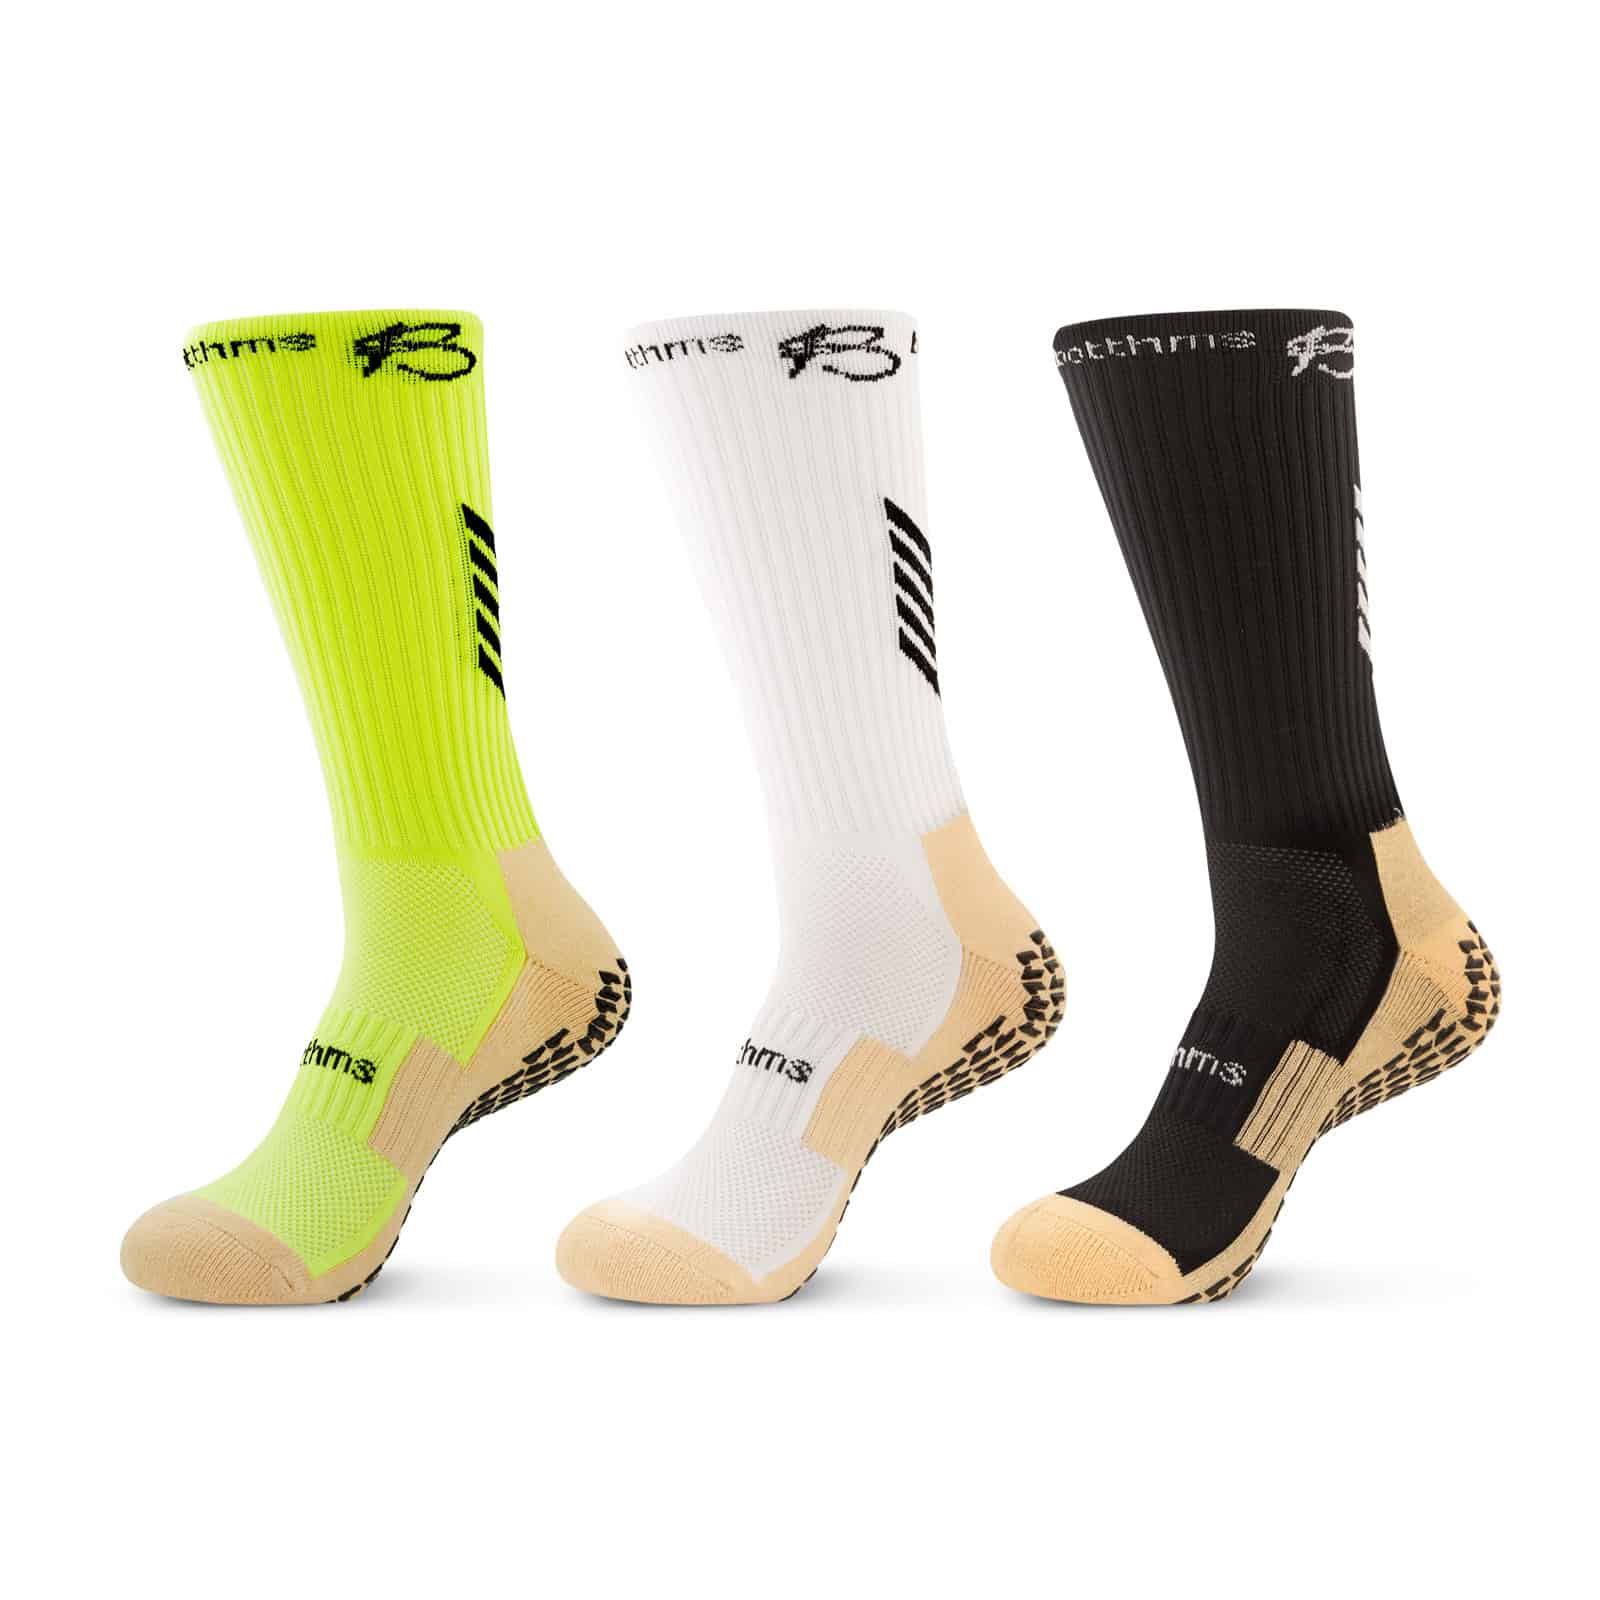 botthms Calf Compression Sleeves